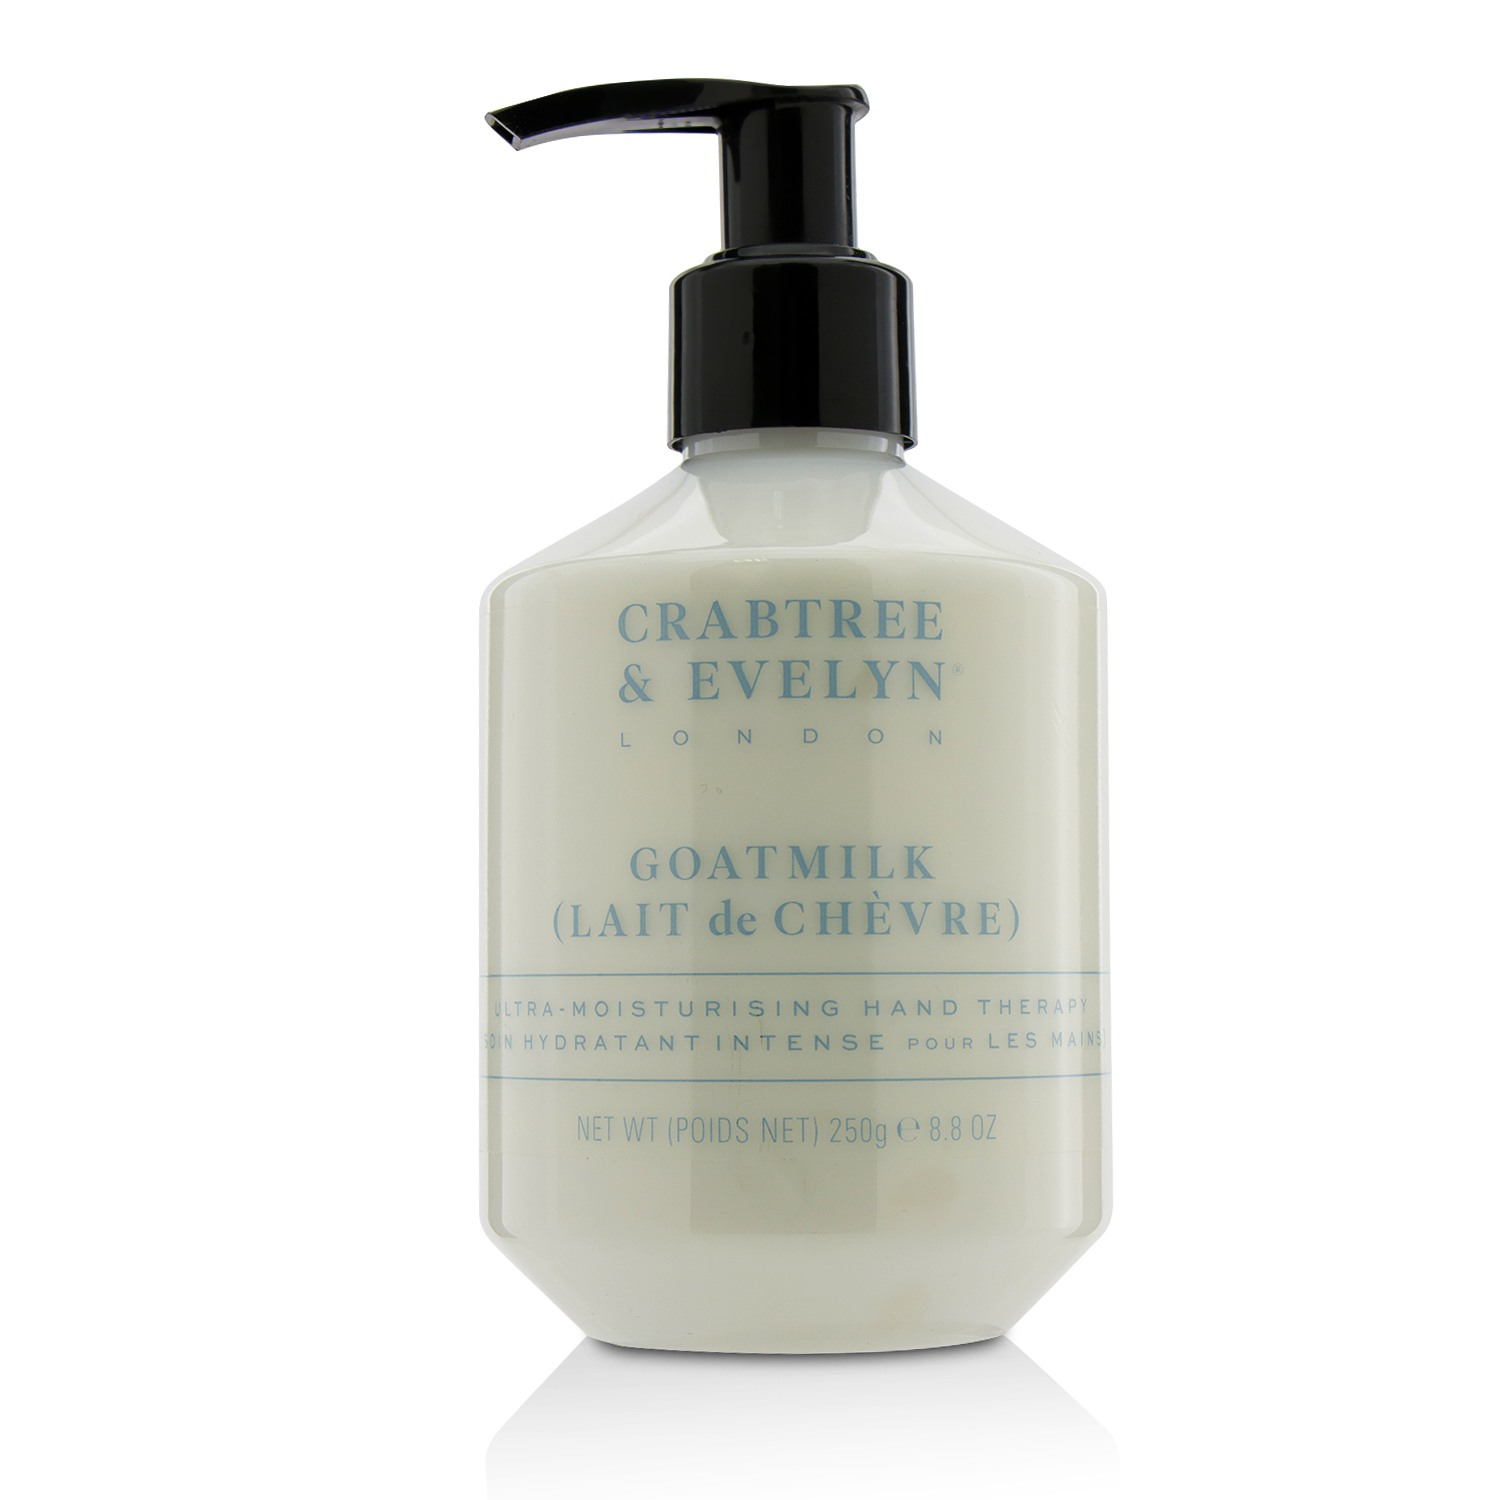 Goatmilk Ultra-Moisturising Hand Therapy - For Sensitive Skin Crabtree & Evelyn Image